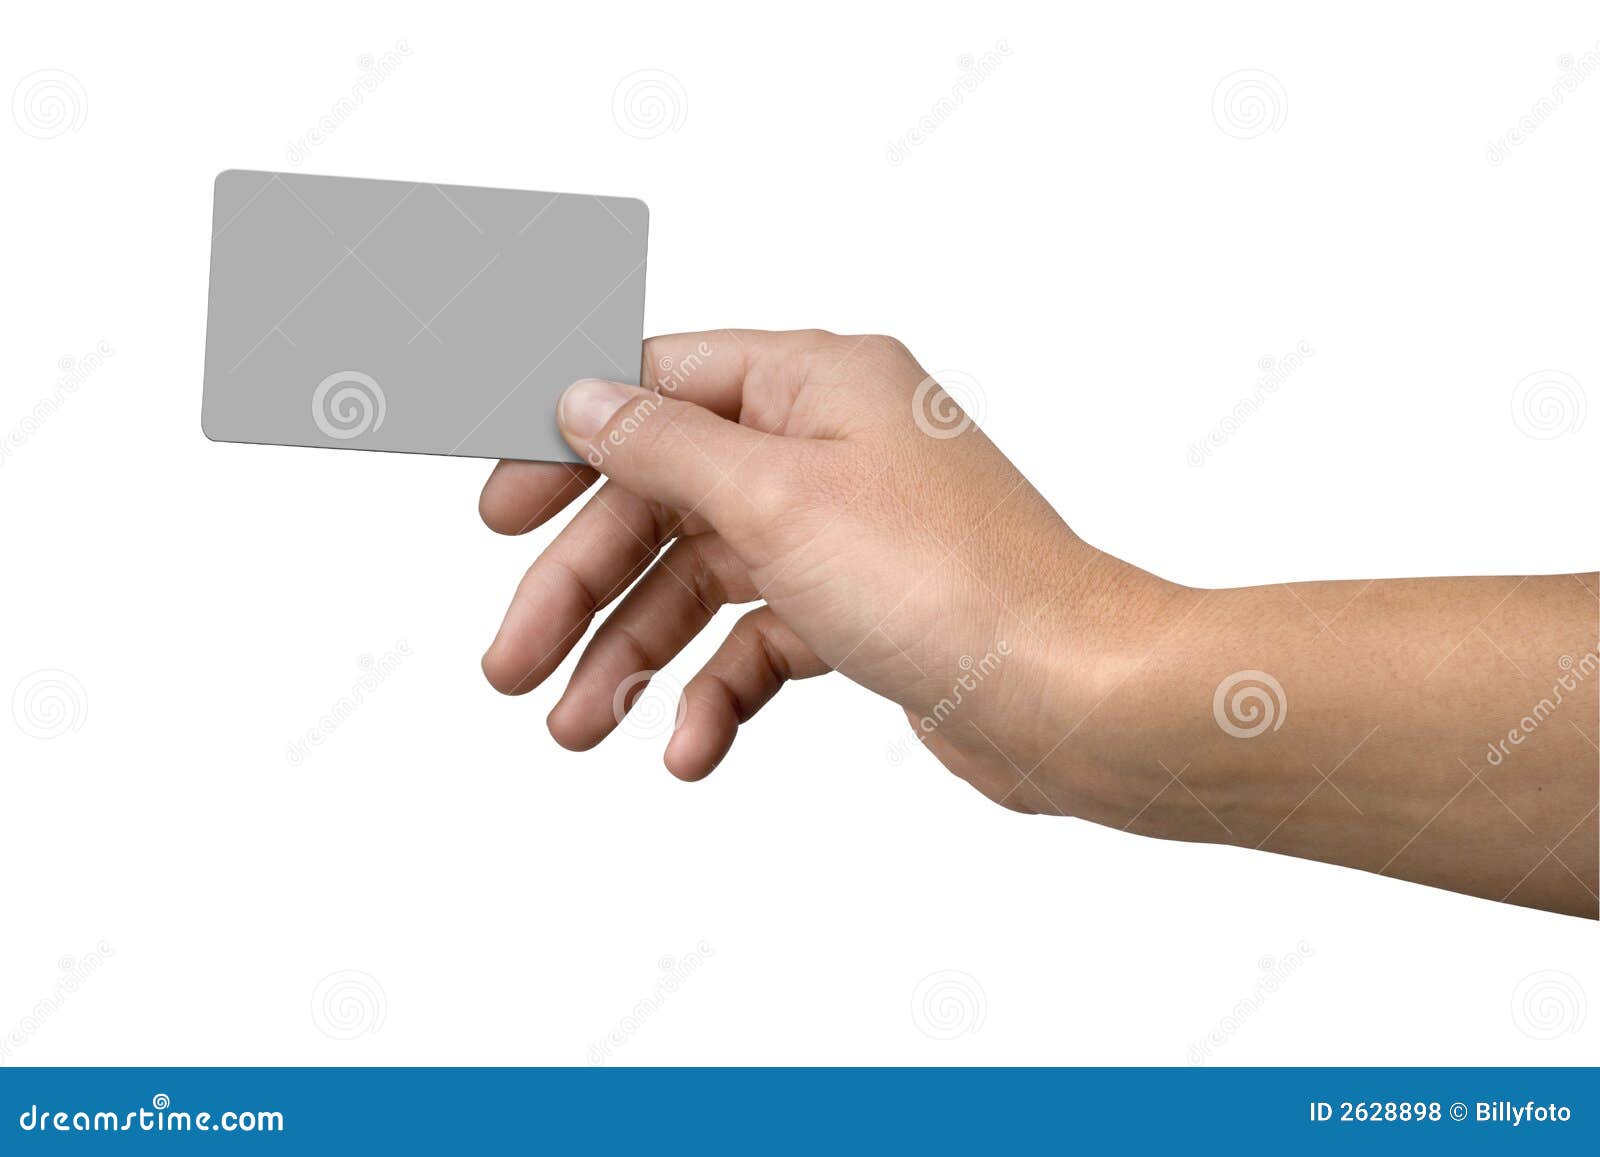 hand and blank credit card